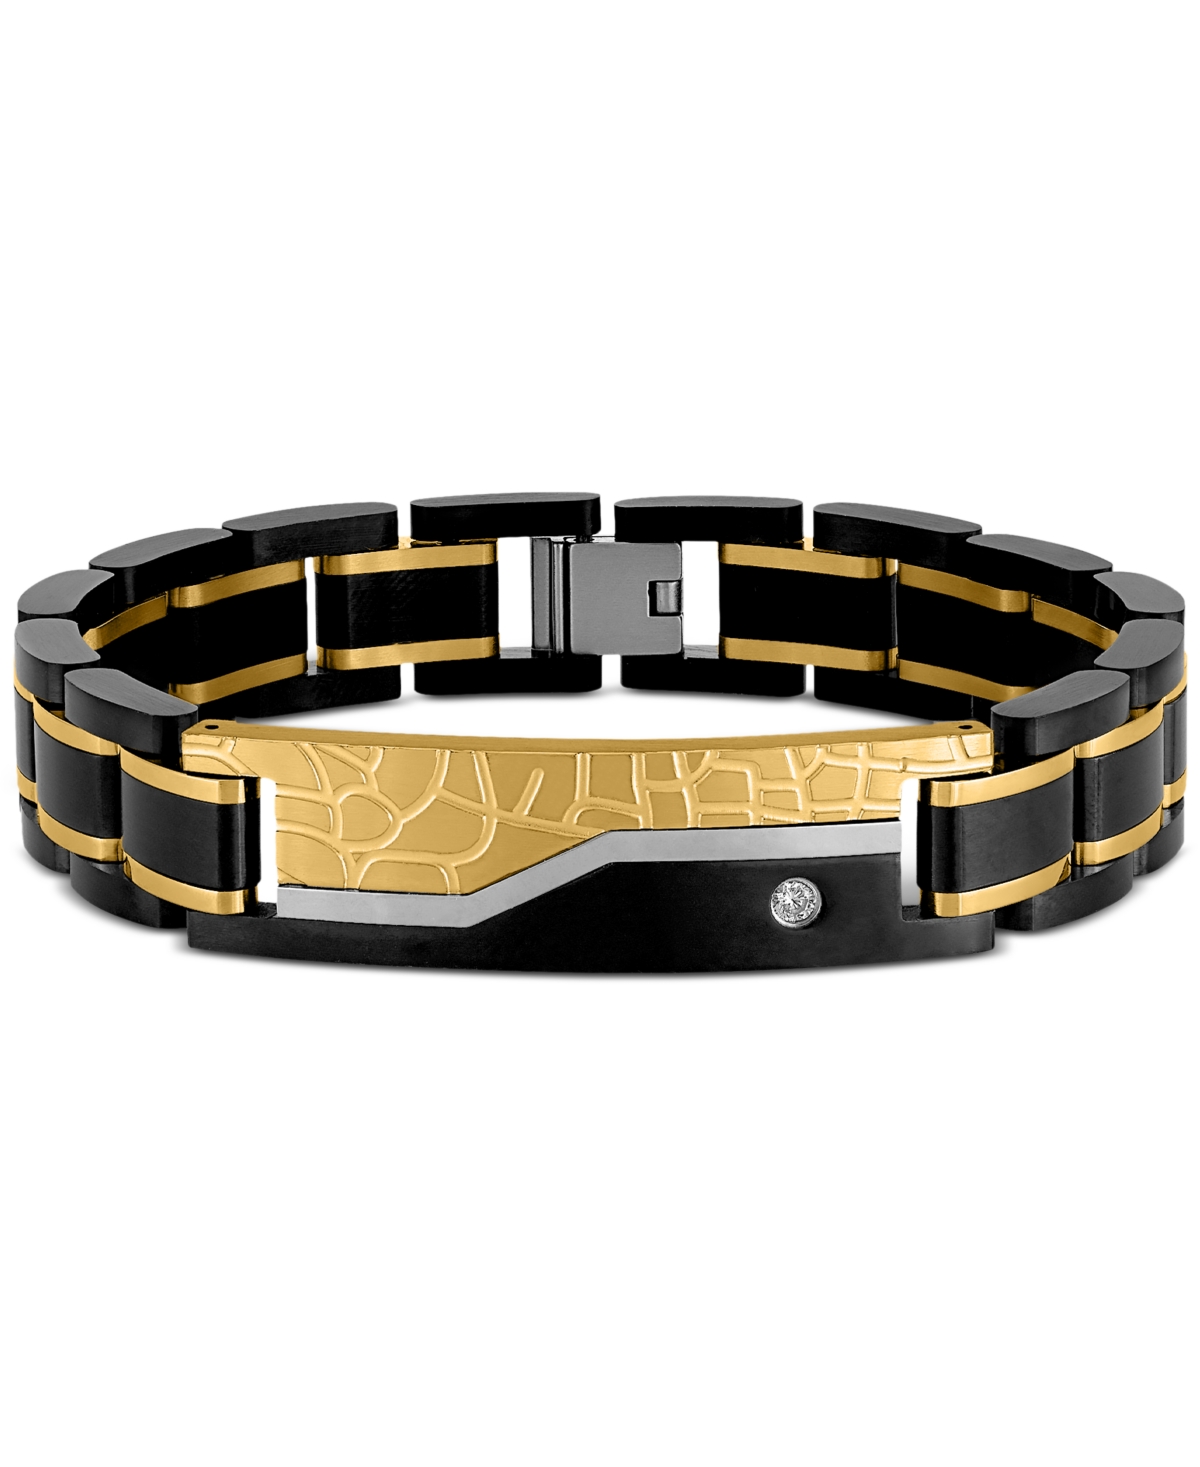 Diamond Watch Link Bracelet (1/20 ct. t.w.) in Black & Gold Ion-Plated Stainless Steel, Created for Macy's - Black